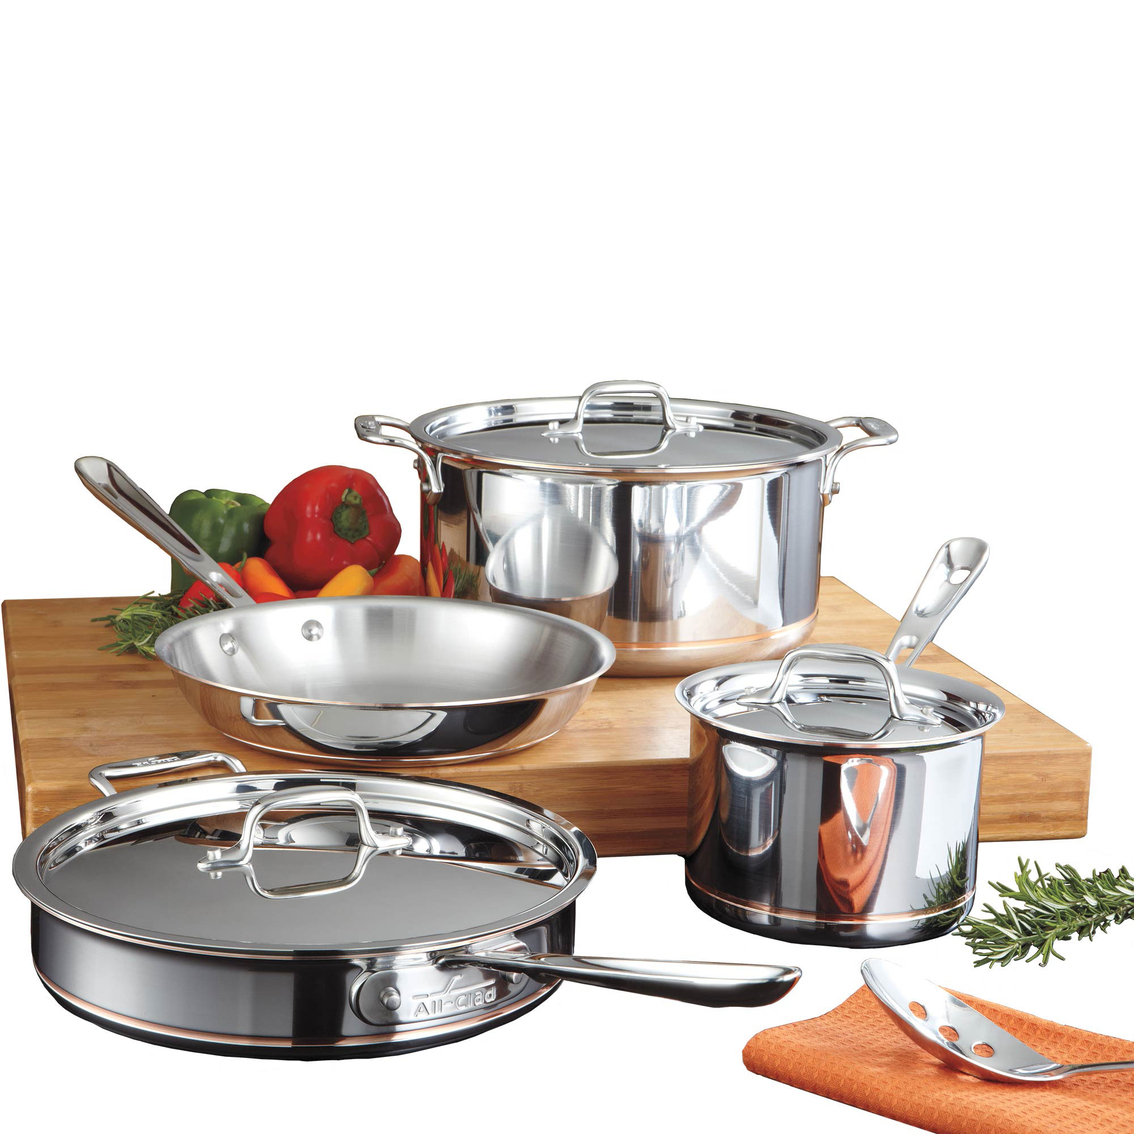 All-clad Stainless Steel And Copper Core 7 Pc. Cookware Set